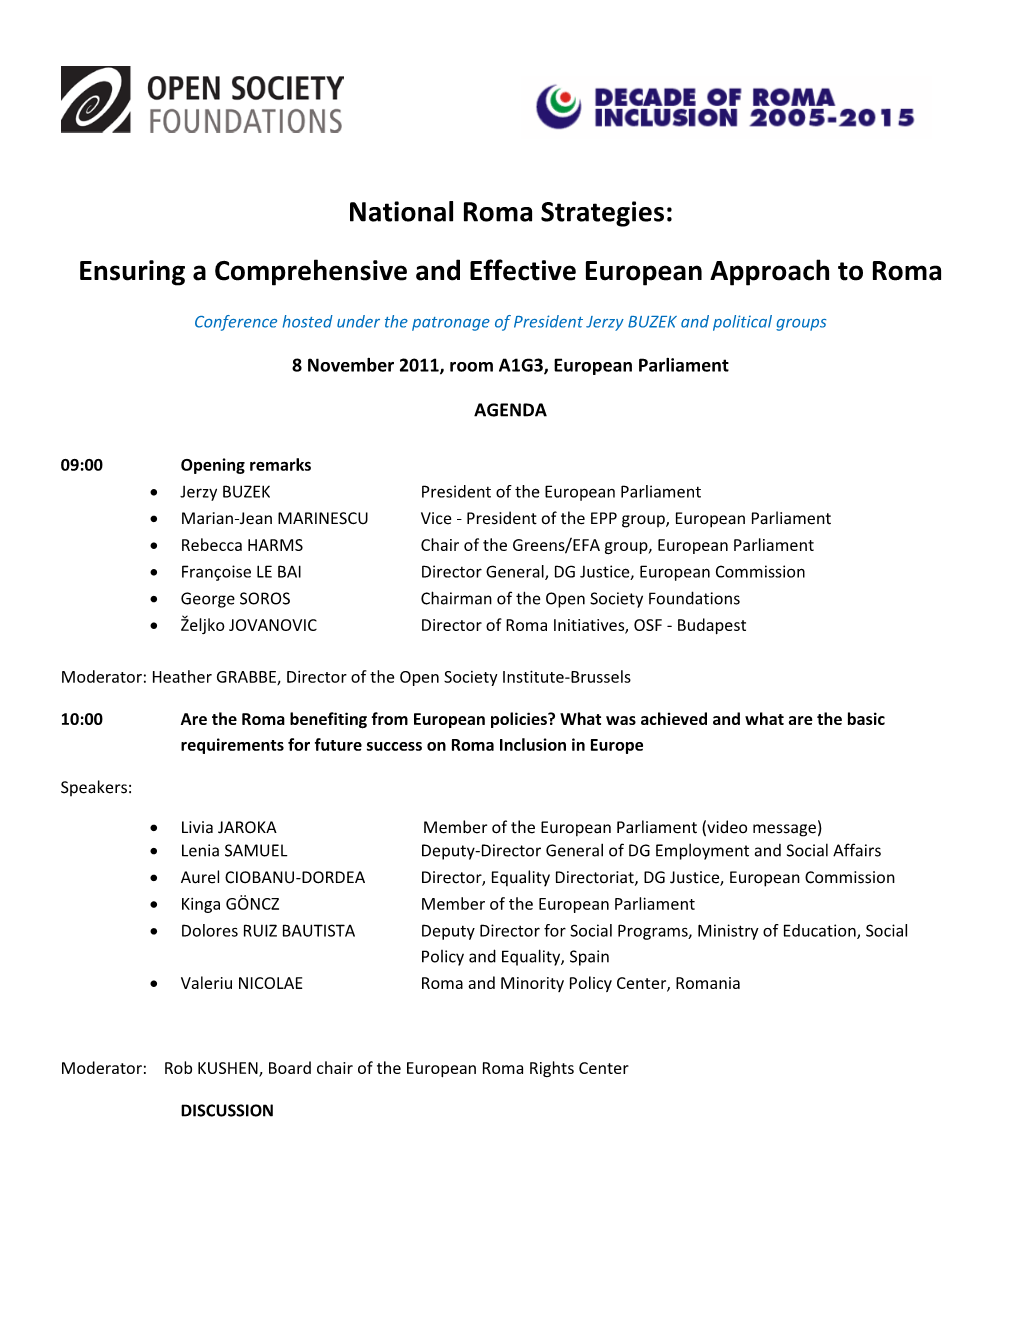 National Roma Strategies: Ensuring a Comprehensive and Effective European Approach to Roma